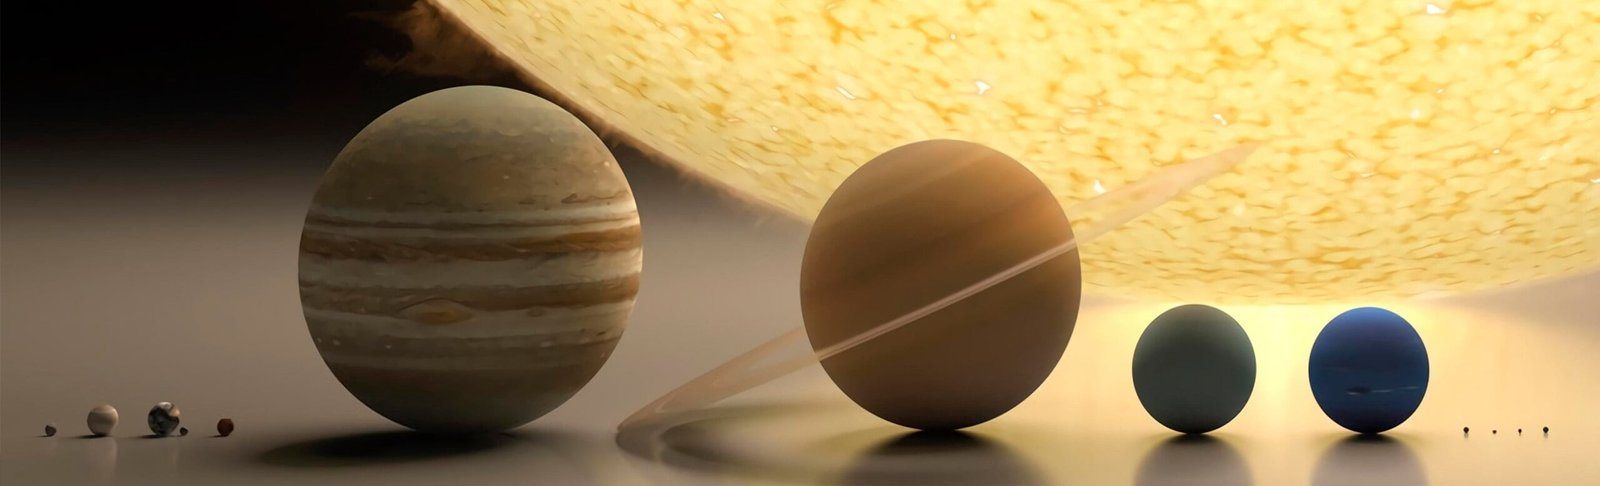 3d models of the solar system